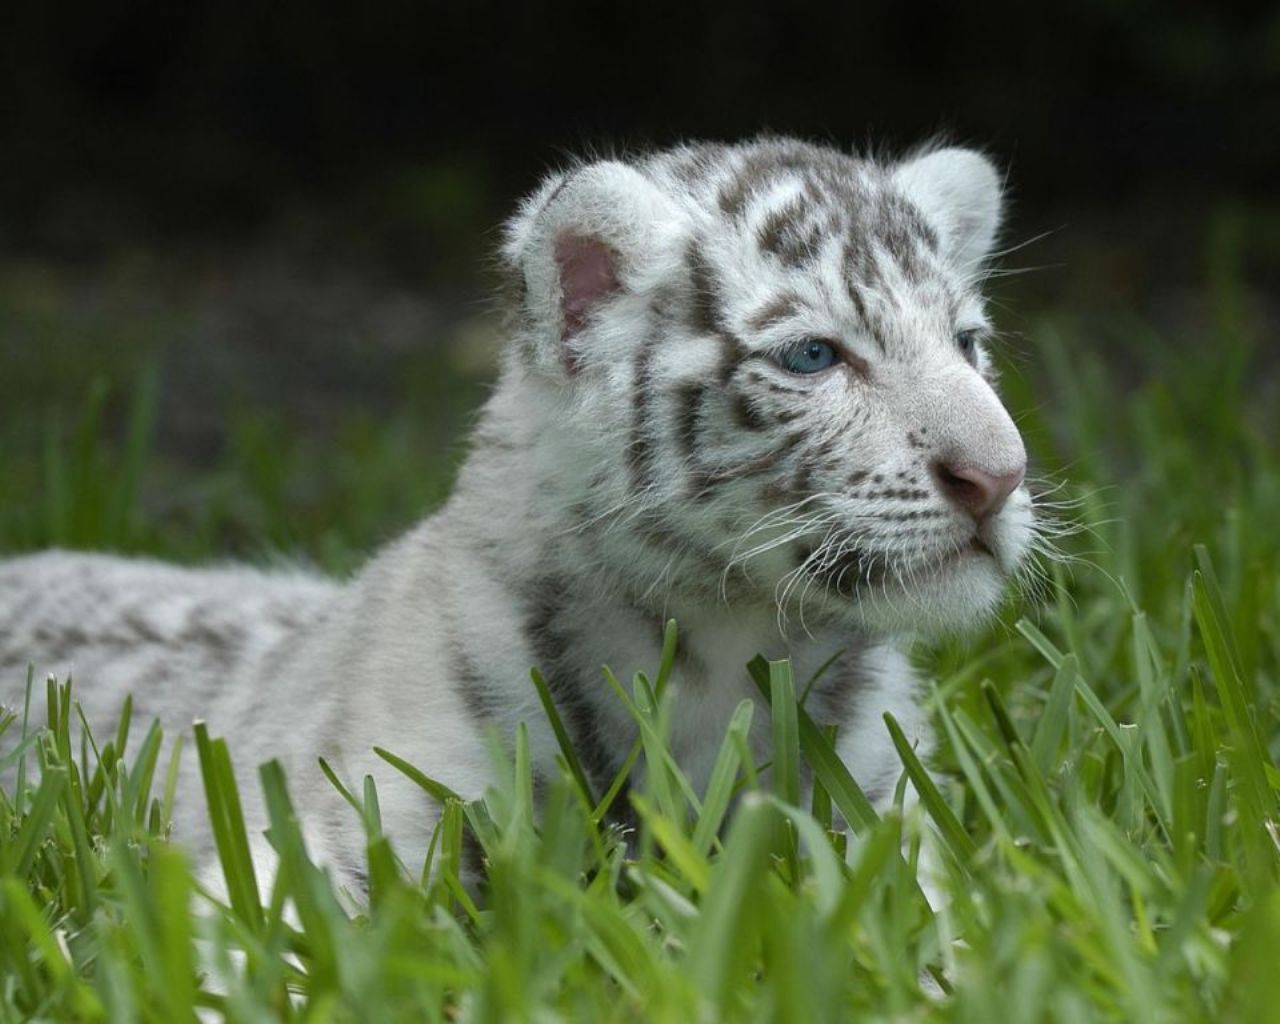 White Tigers Cubs Wallpaper images